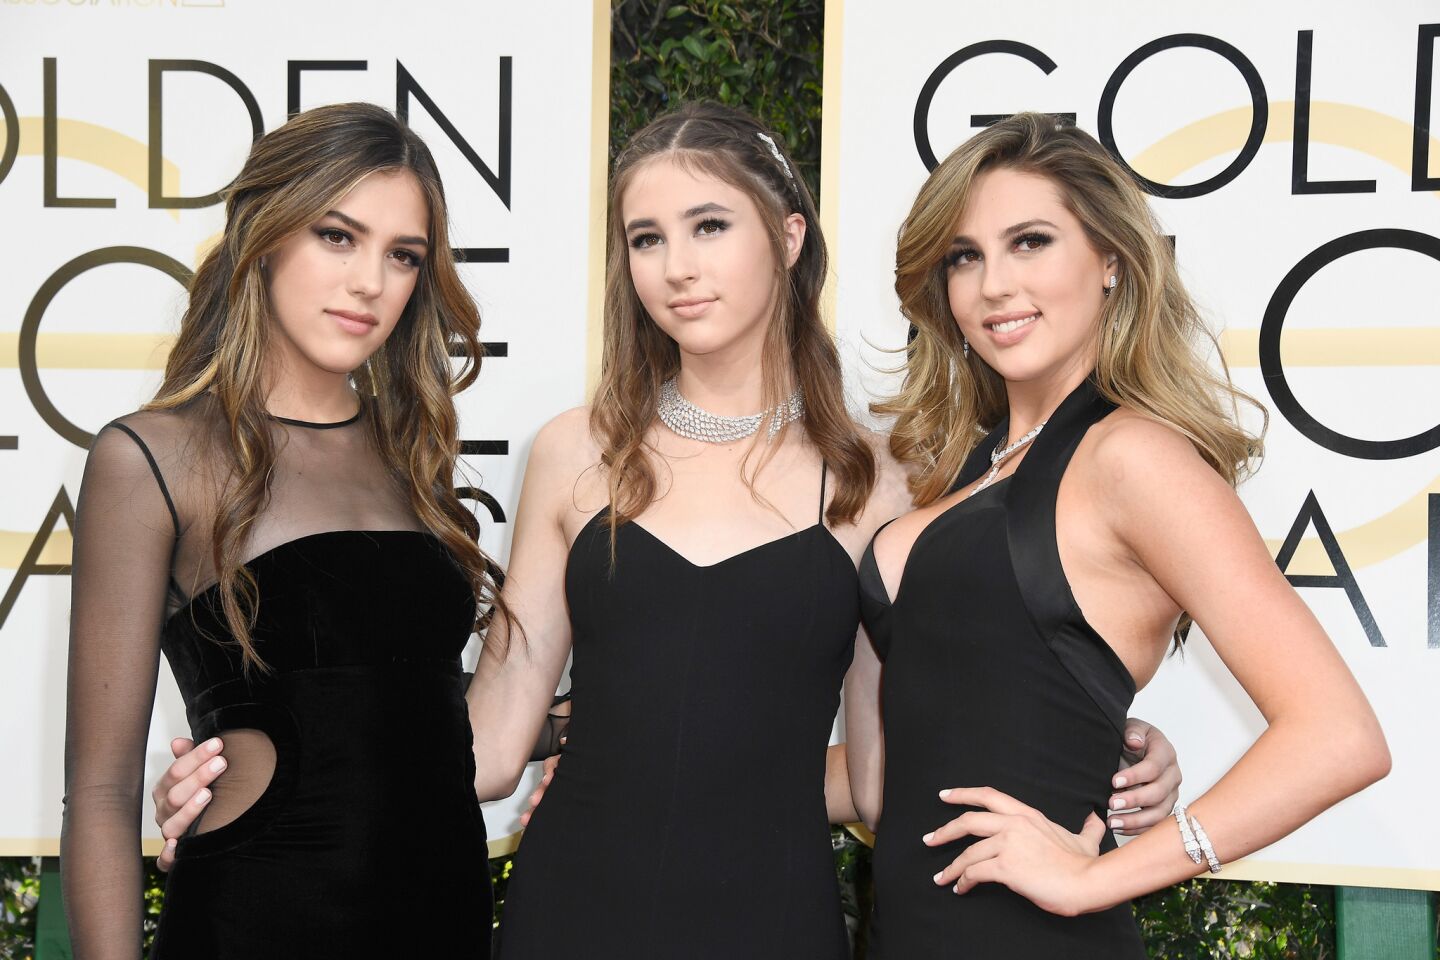 The three daughters of Sylvester Stallone and his wife, former model Jennifer Flavin, attended the 2016 Golden Globes with their parents. That year, their father won the Golden Globe for actor in a supporting role in a motion picture for his role in "Creed."